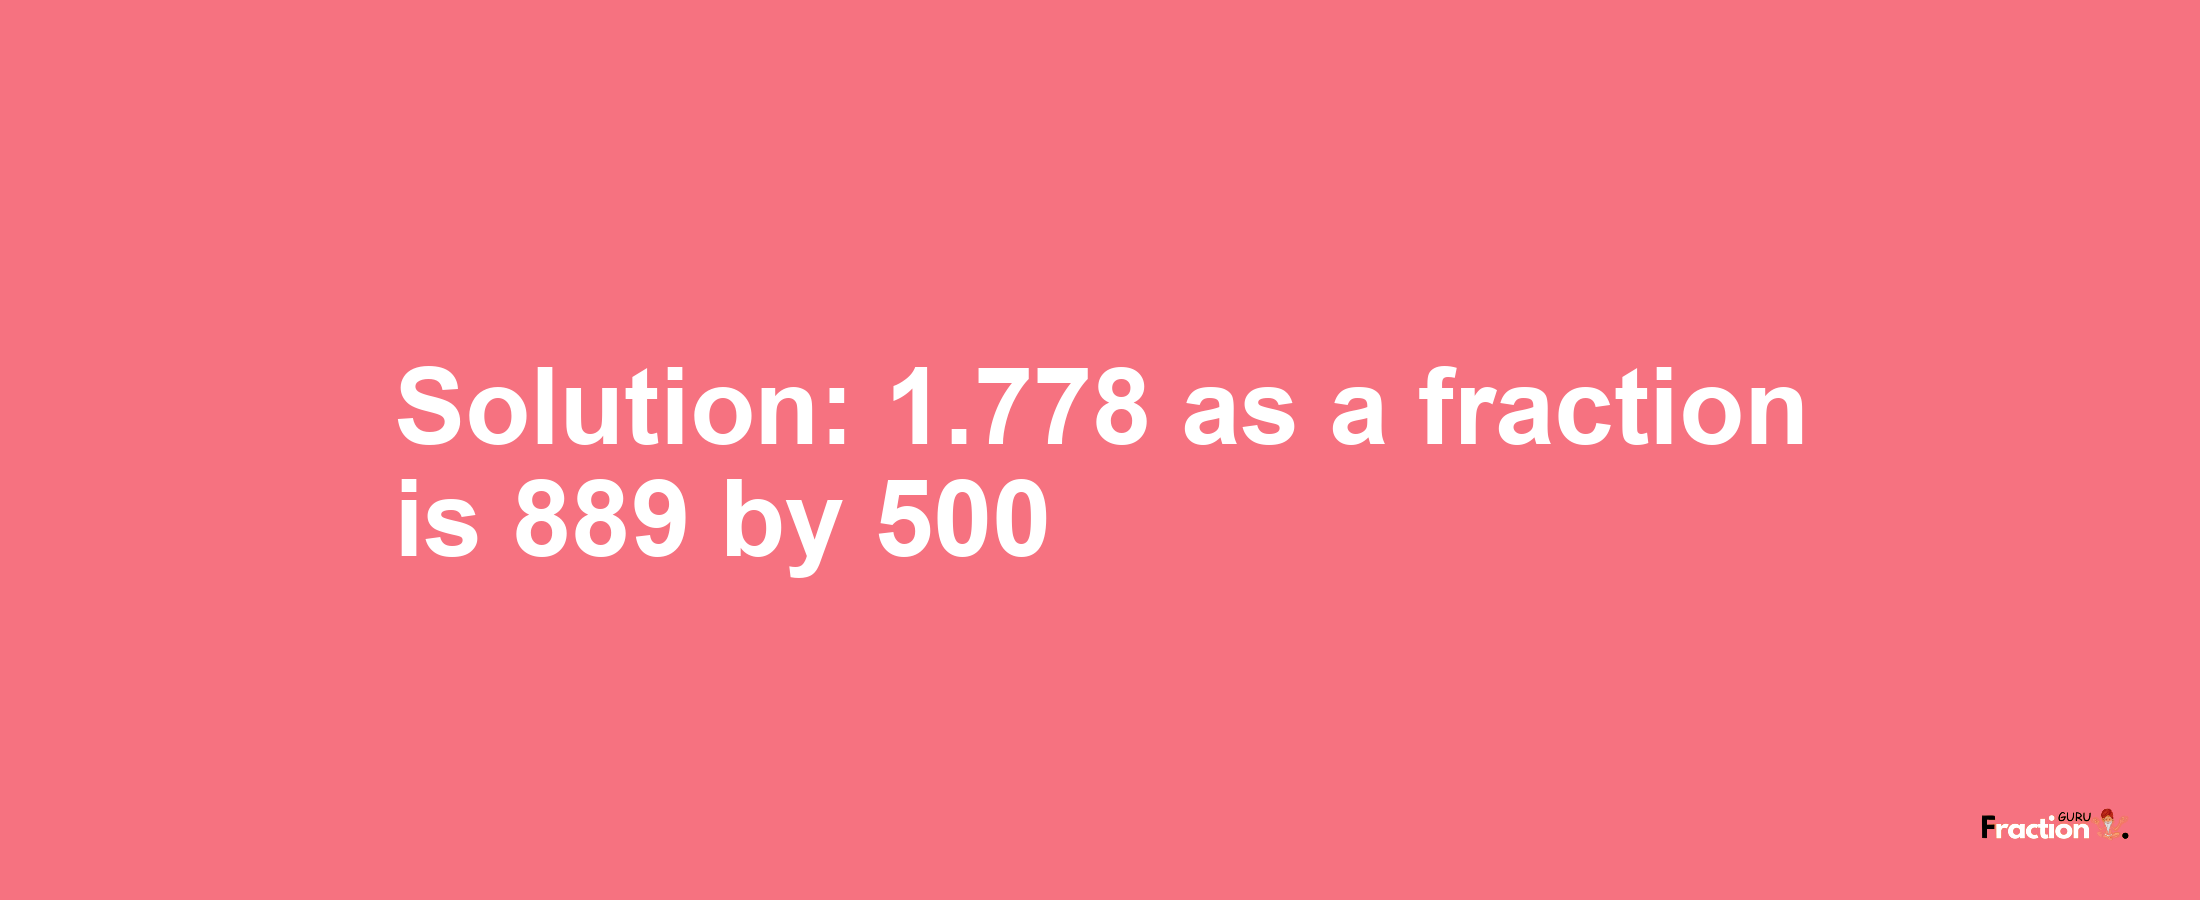 Solution:1.778 as a fraction is 889/500